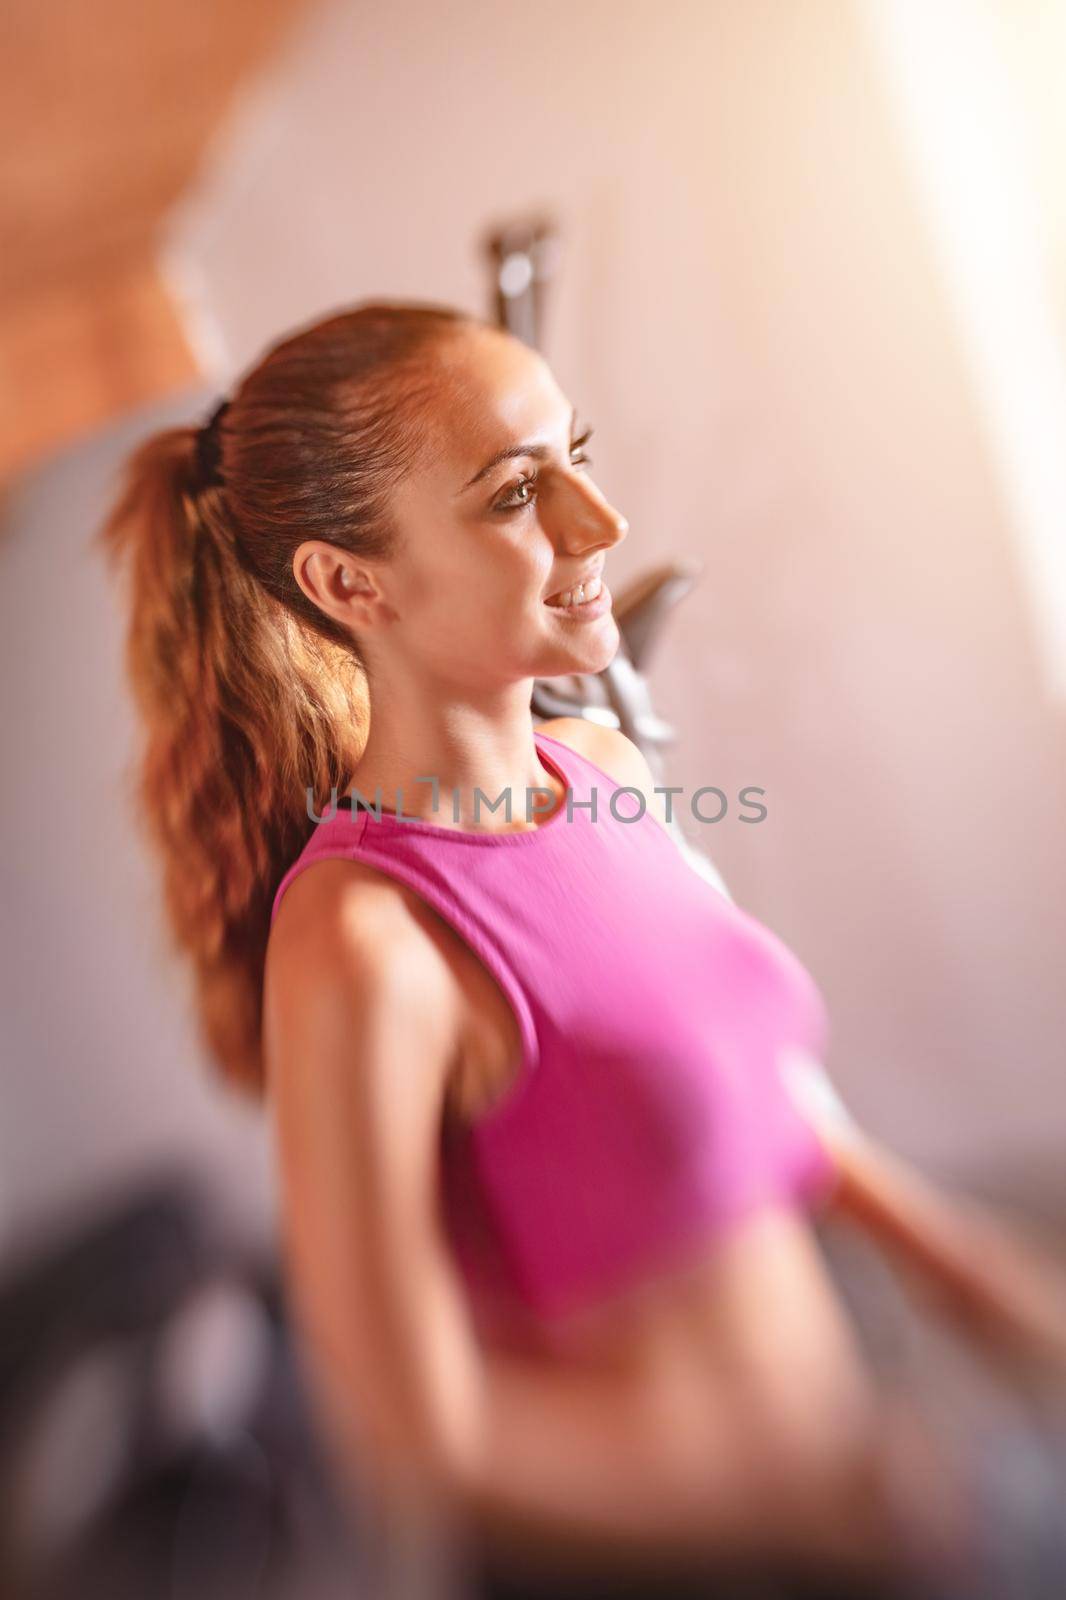 Beautiful young woman doing exercises at her home.